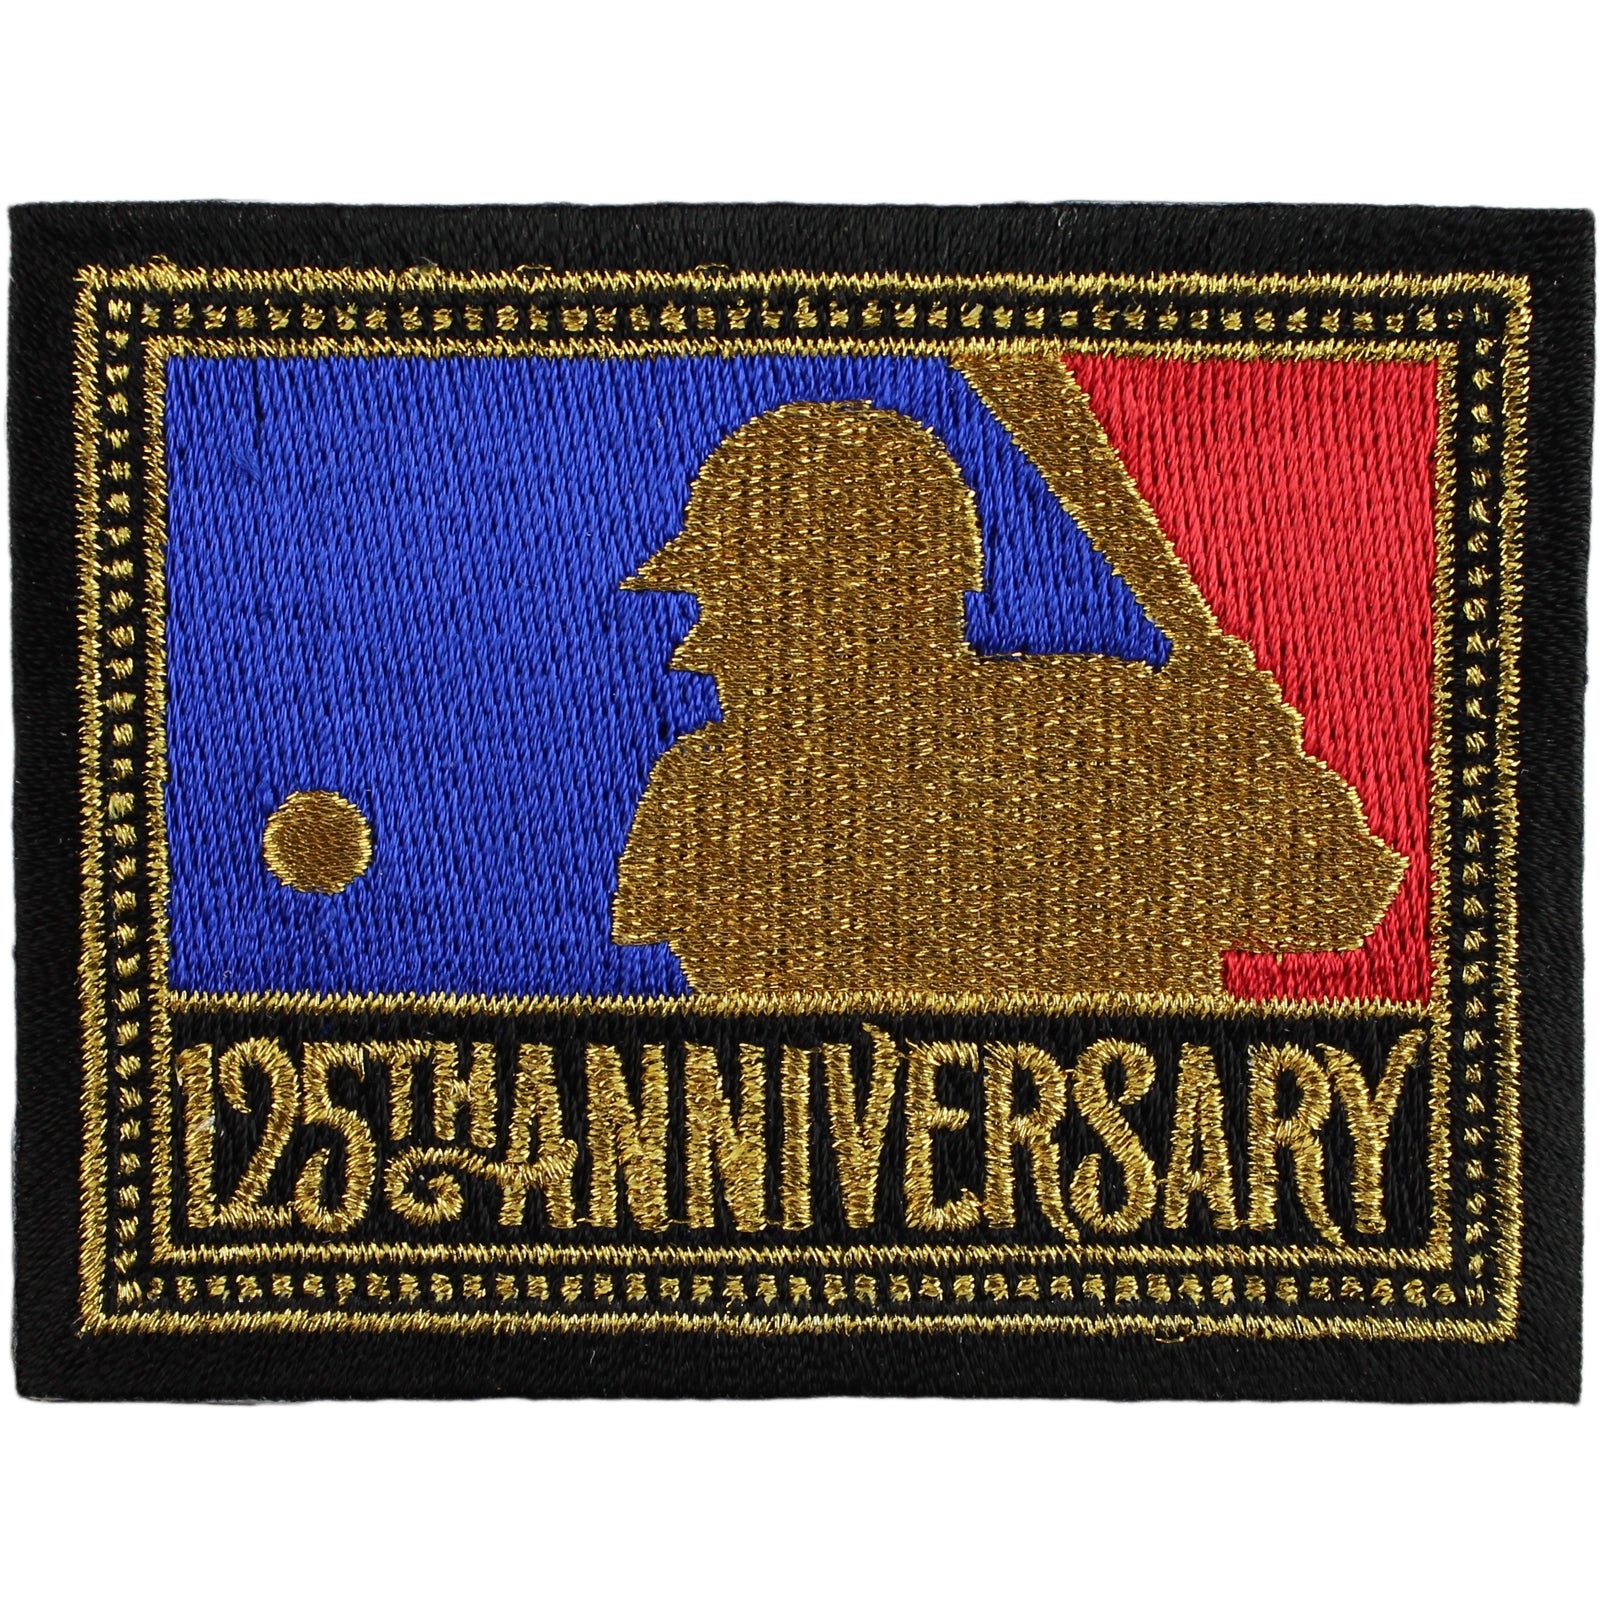 MLB Major League Baseball 125th Anniversary Patch 1994 – Patch Collection